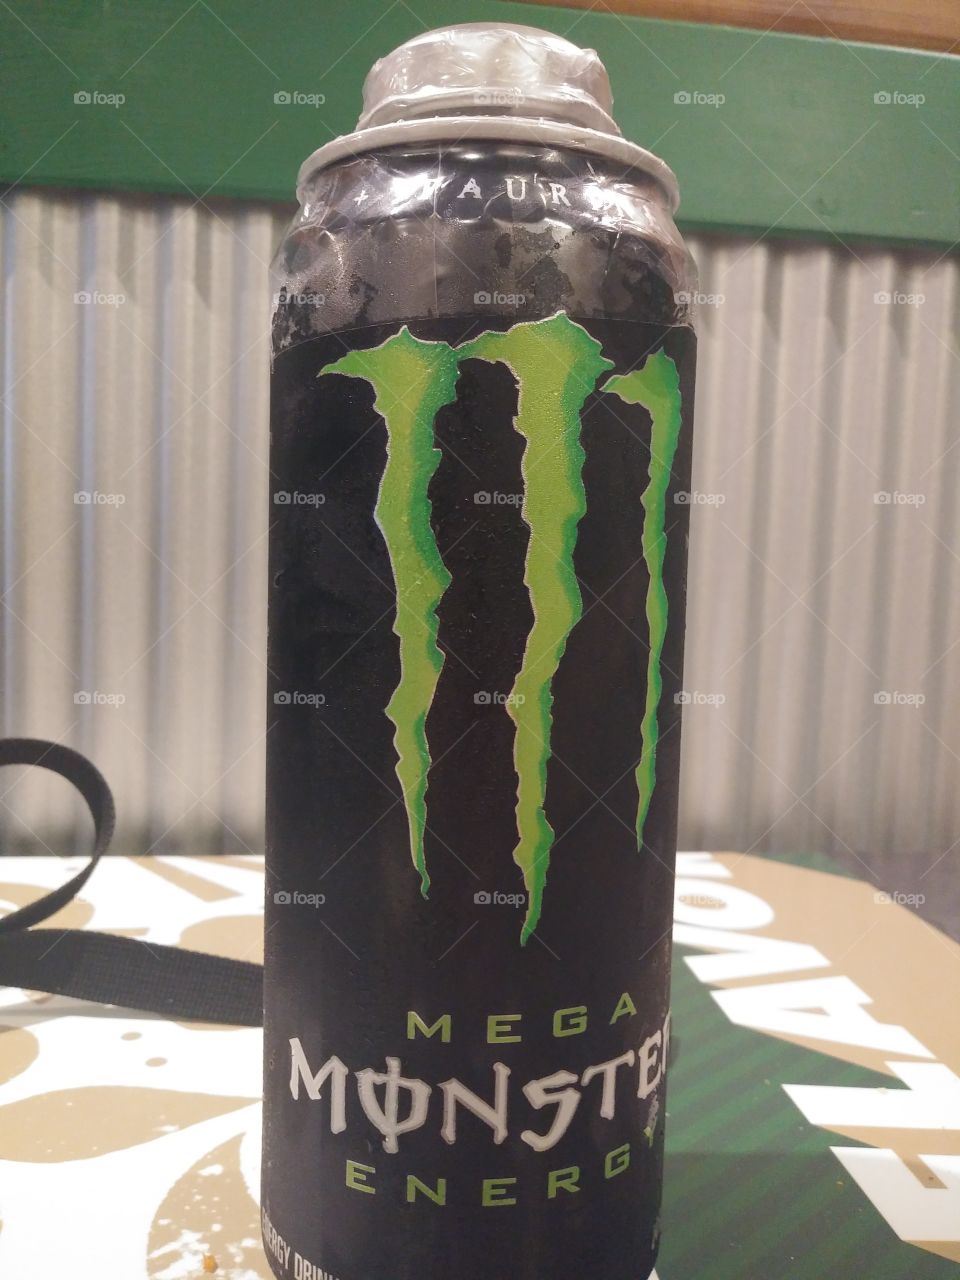 live the life of a monster.You can feel the power and energy with 1 or 2 hits of monster.Great flavor and i love the drink.It makes me feel the rush and explosion inside.It will turn you into a monster for the day while you work at your job.